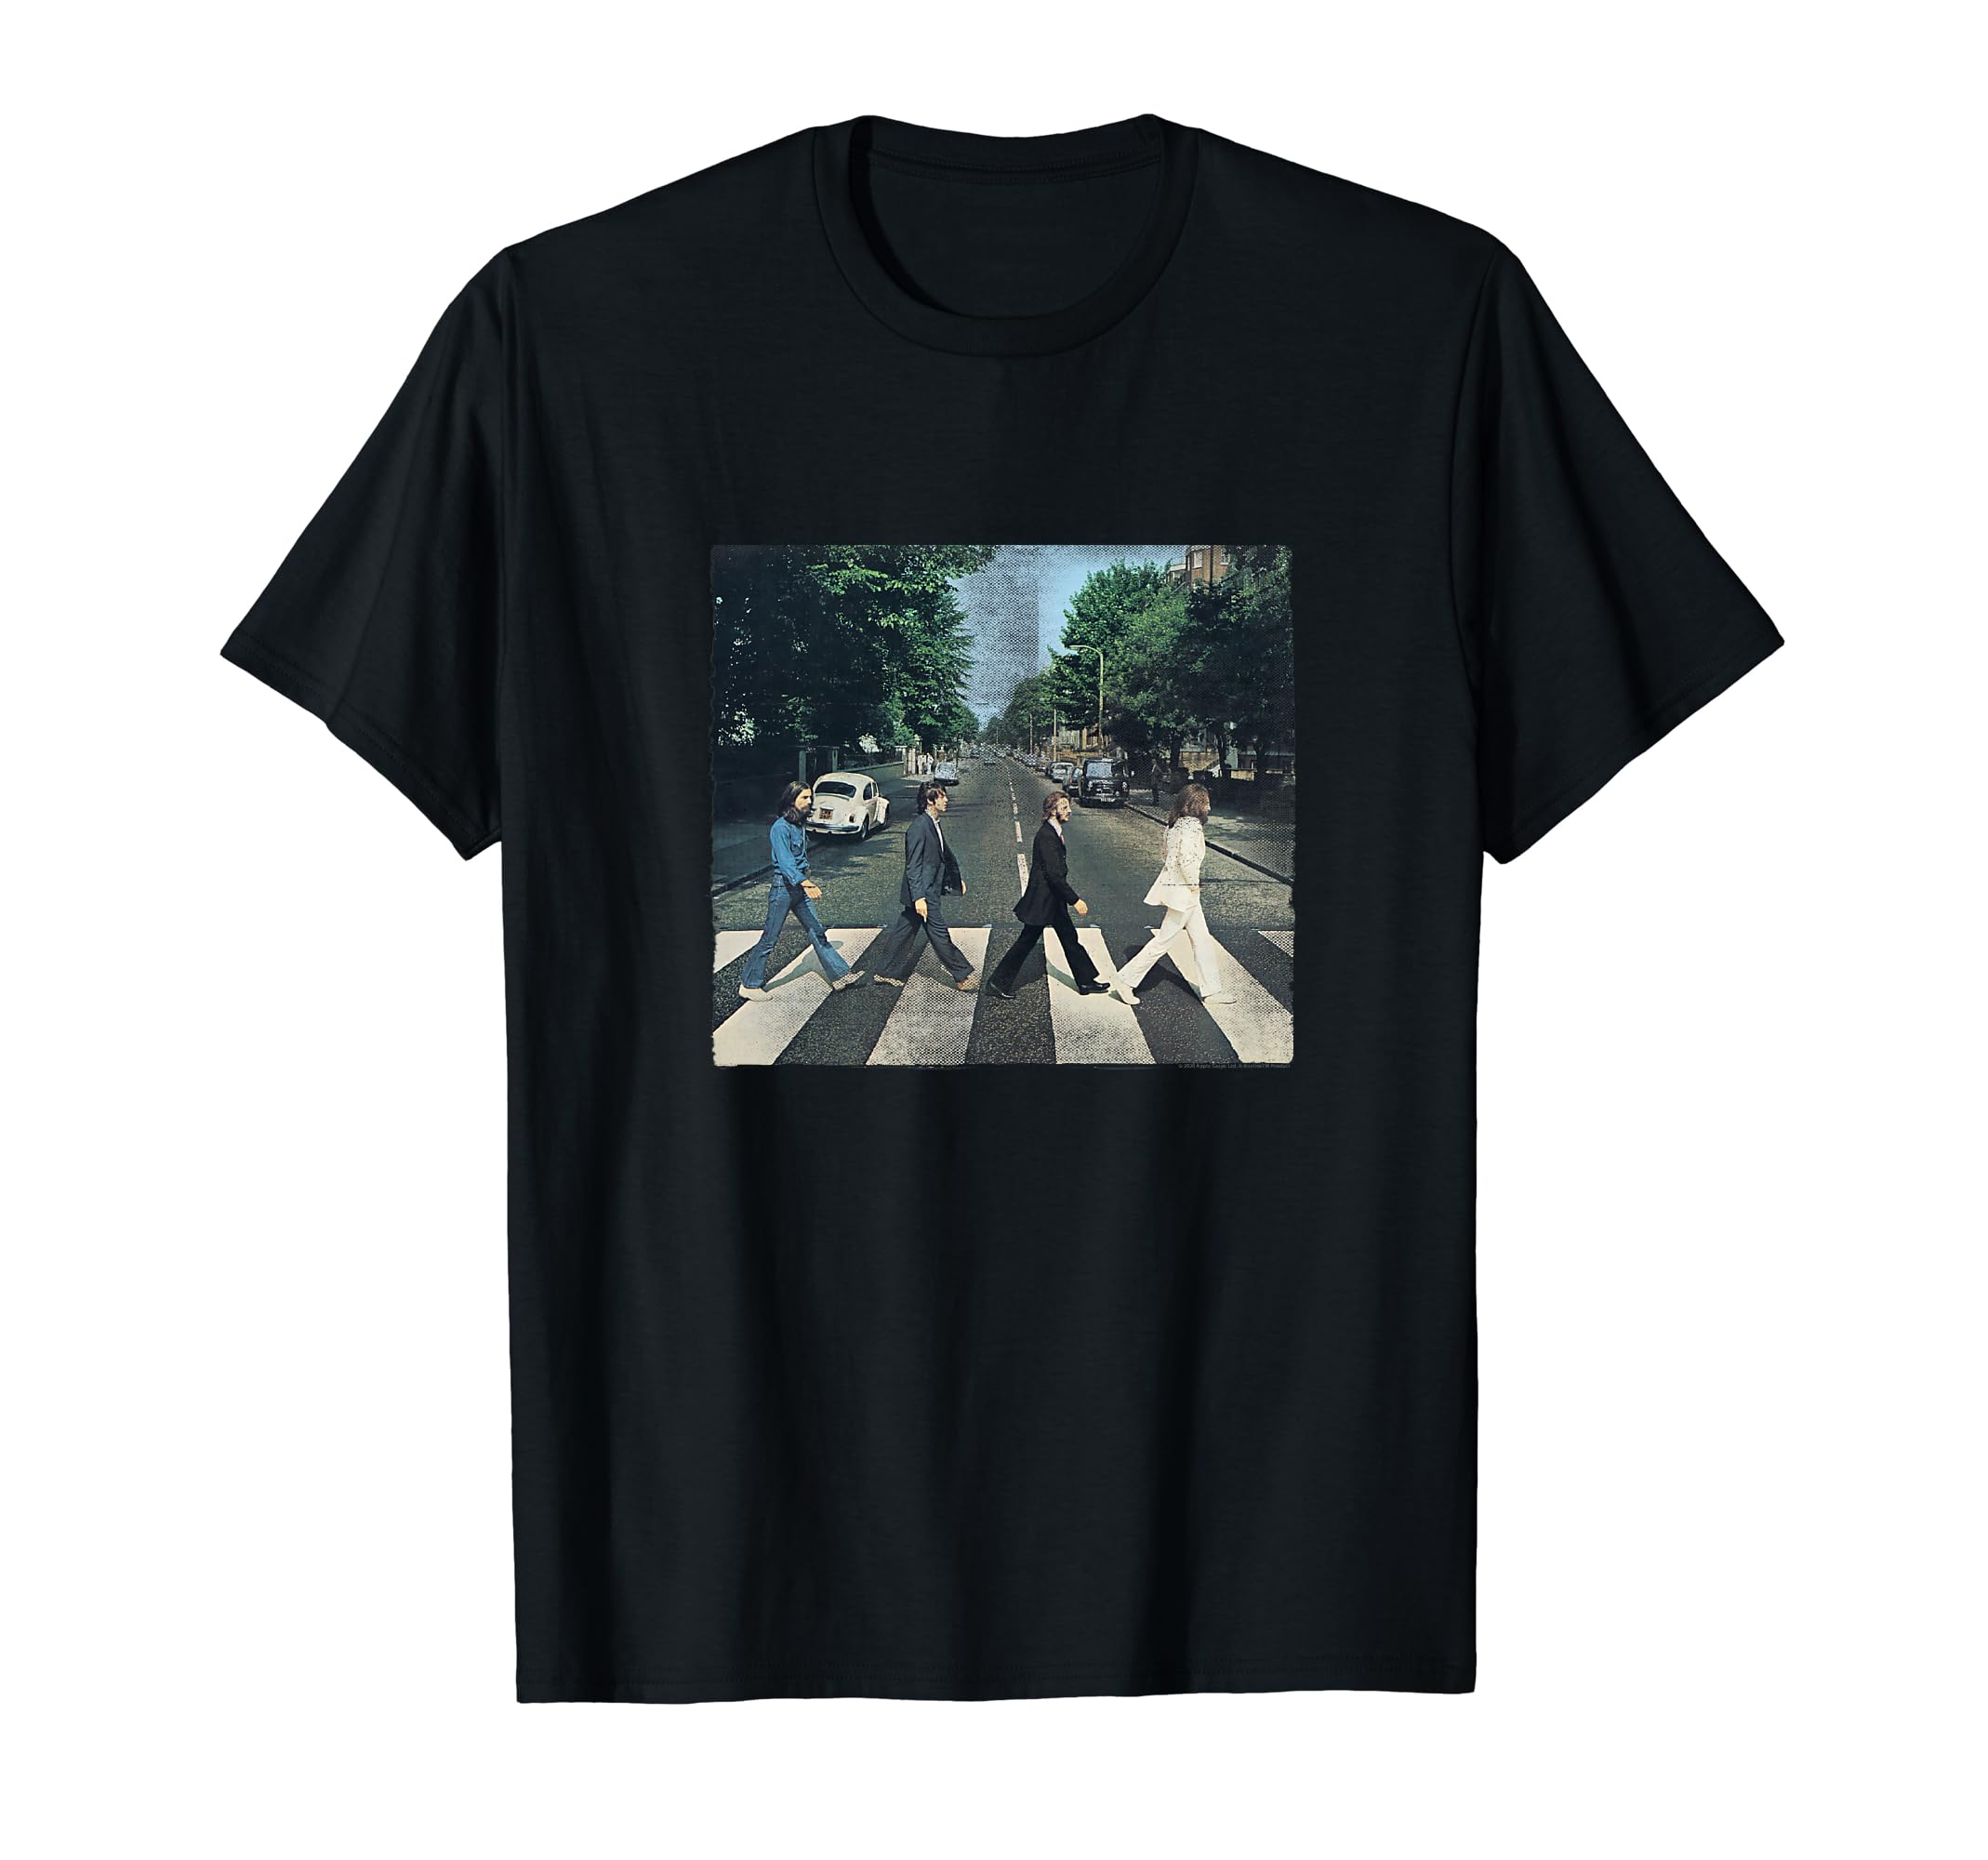 The Beatles Crossing Abbey Road T-Shirt